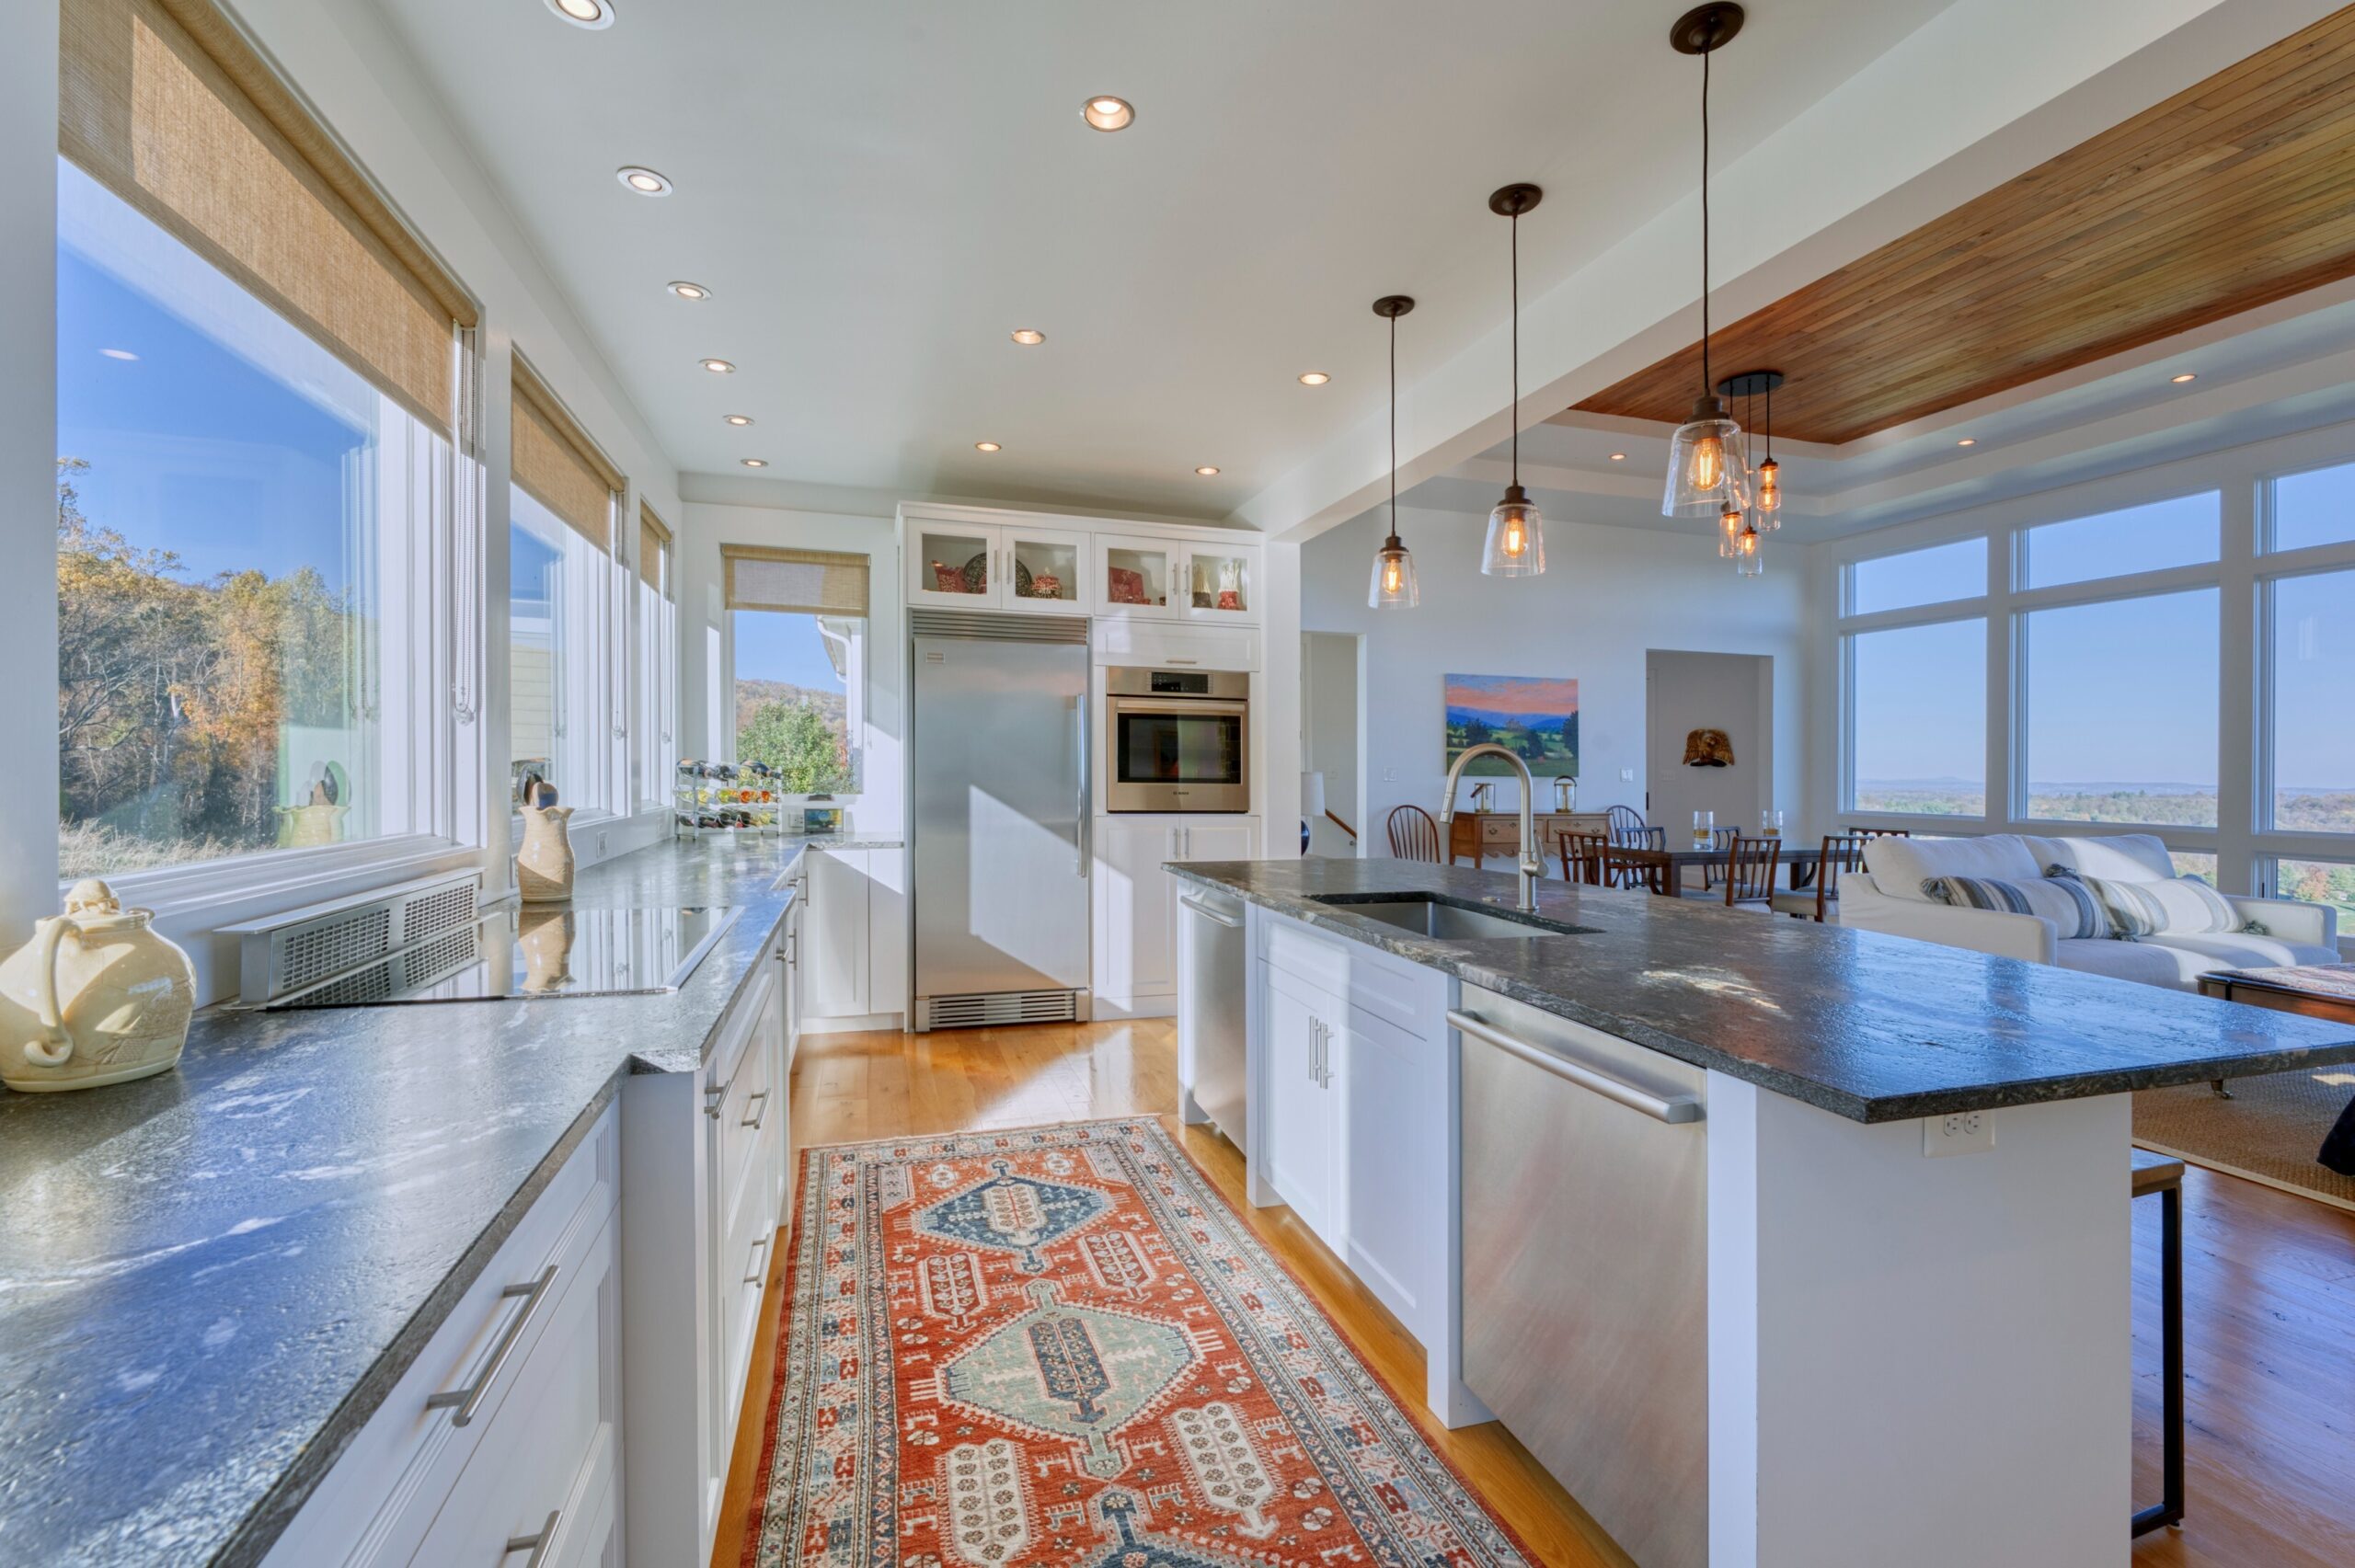 Professional interior photo of 17151 Brookdale Ln in Round Hill, VA - showing the kitchen with stone countertops, high-end stainless appliances, large island and views out either side through large windows